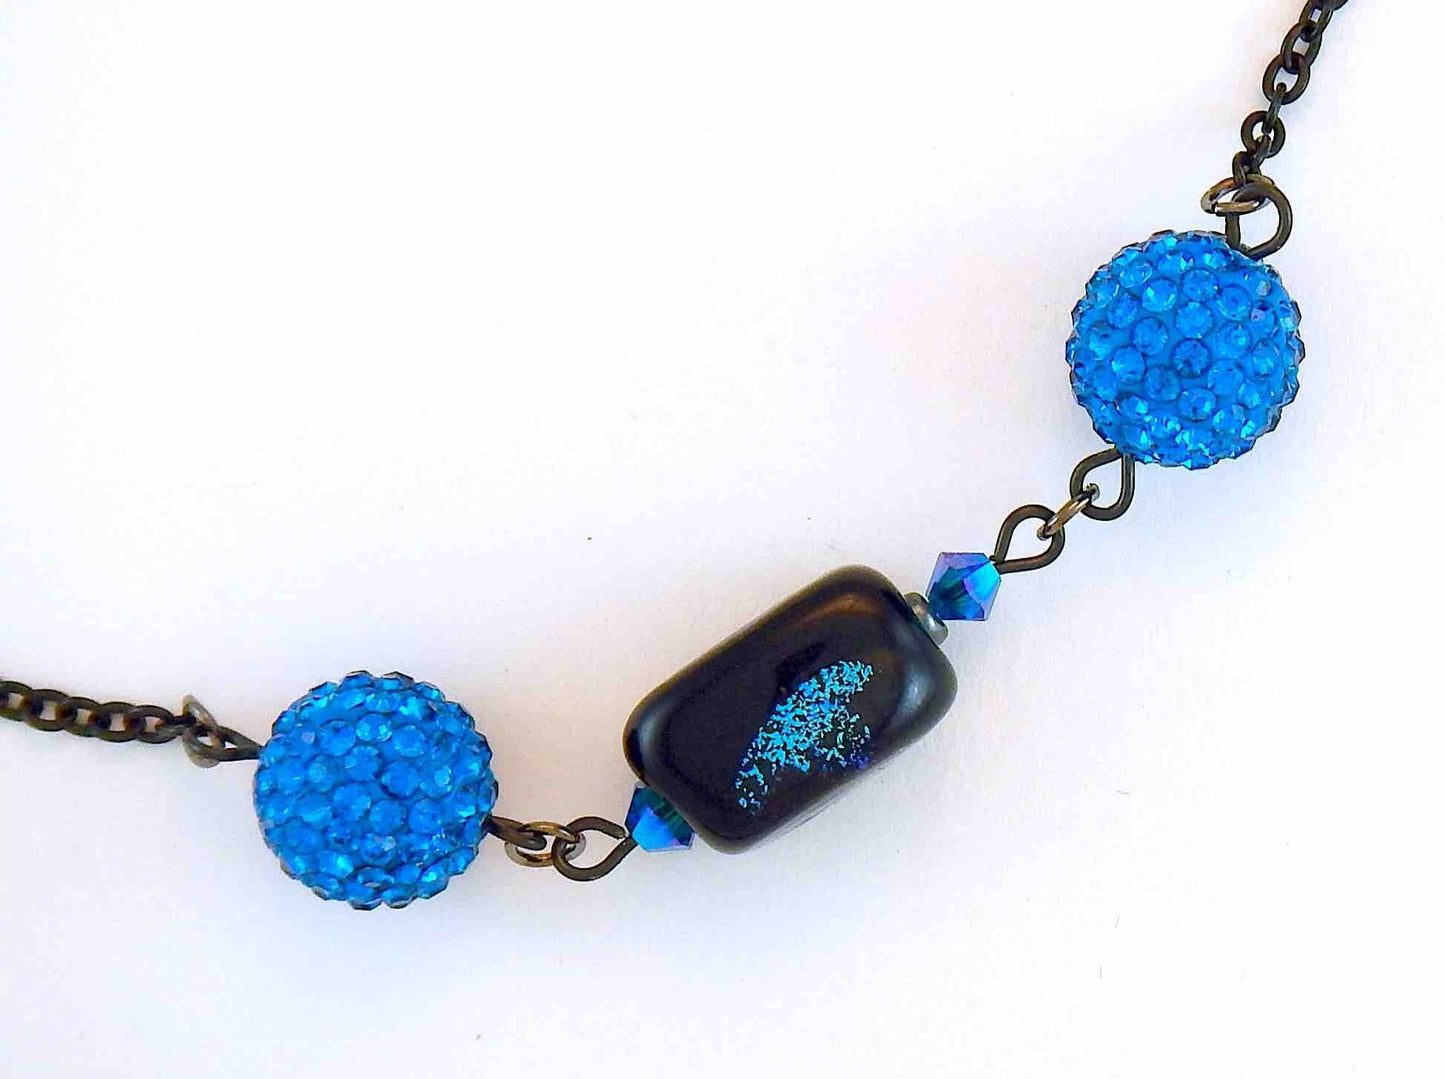 15-inch necklace with black and blue glass cube (Murano-style glass handmade in Montreal), bright blue Shambala beads, black stainless steel chain